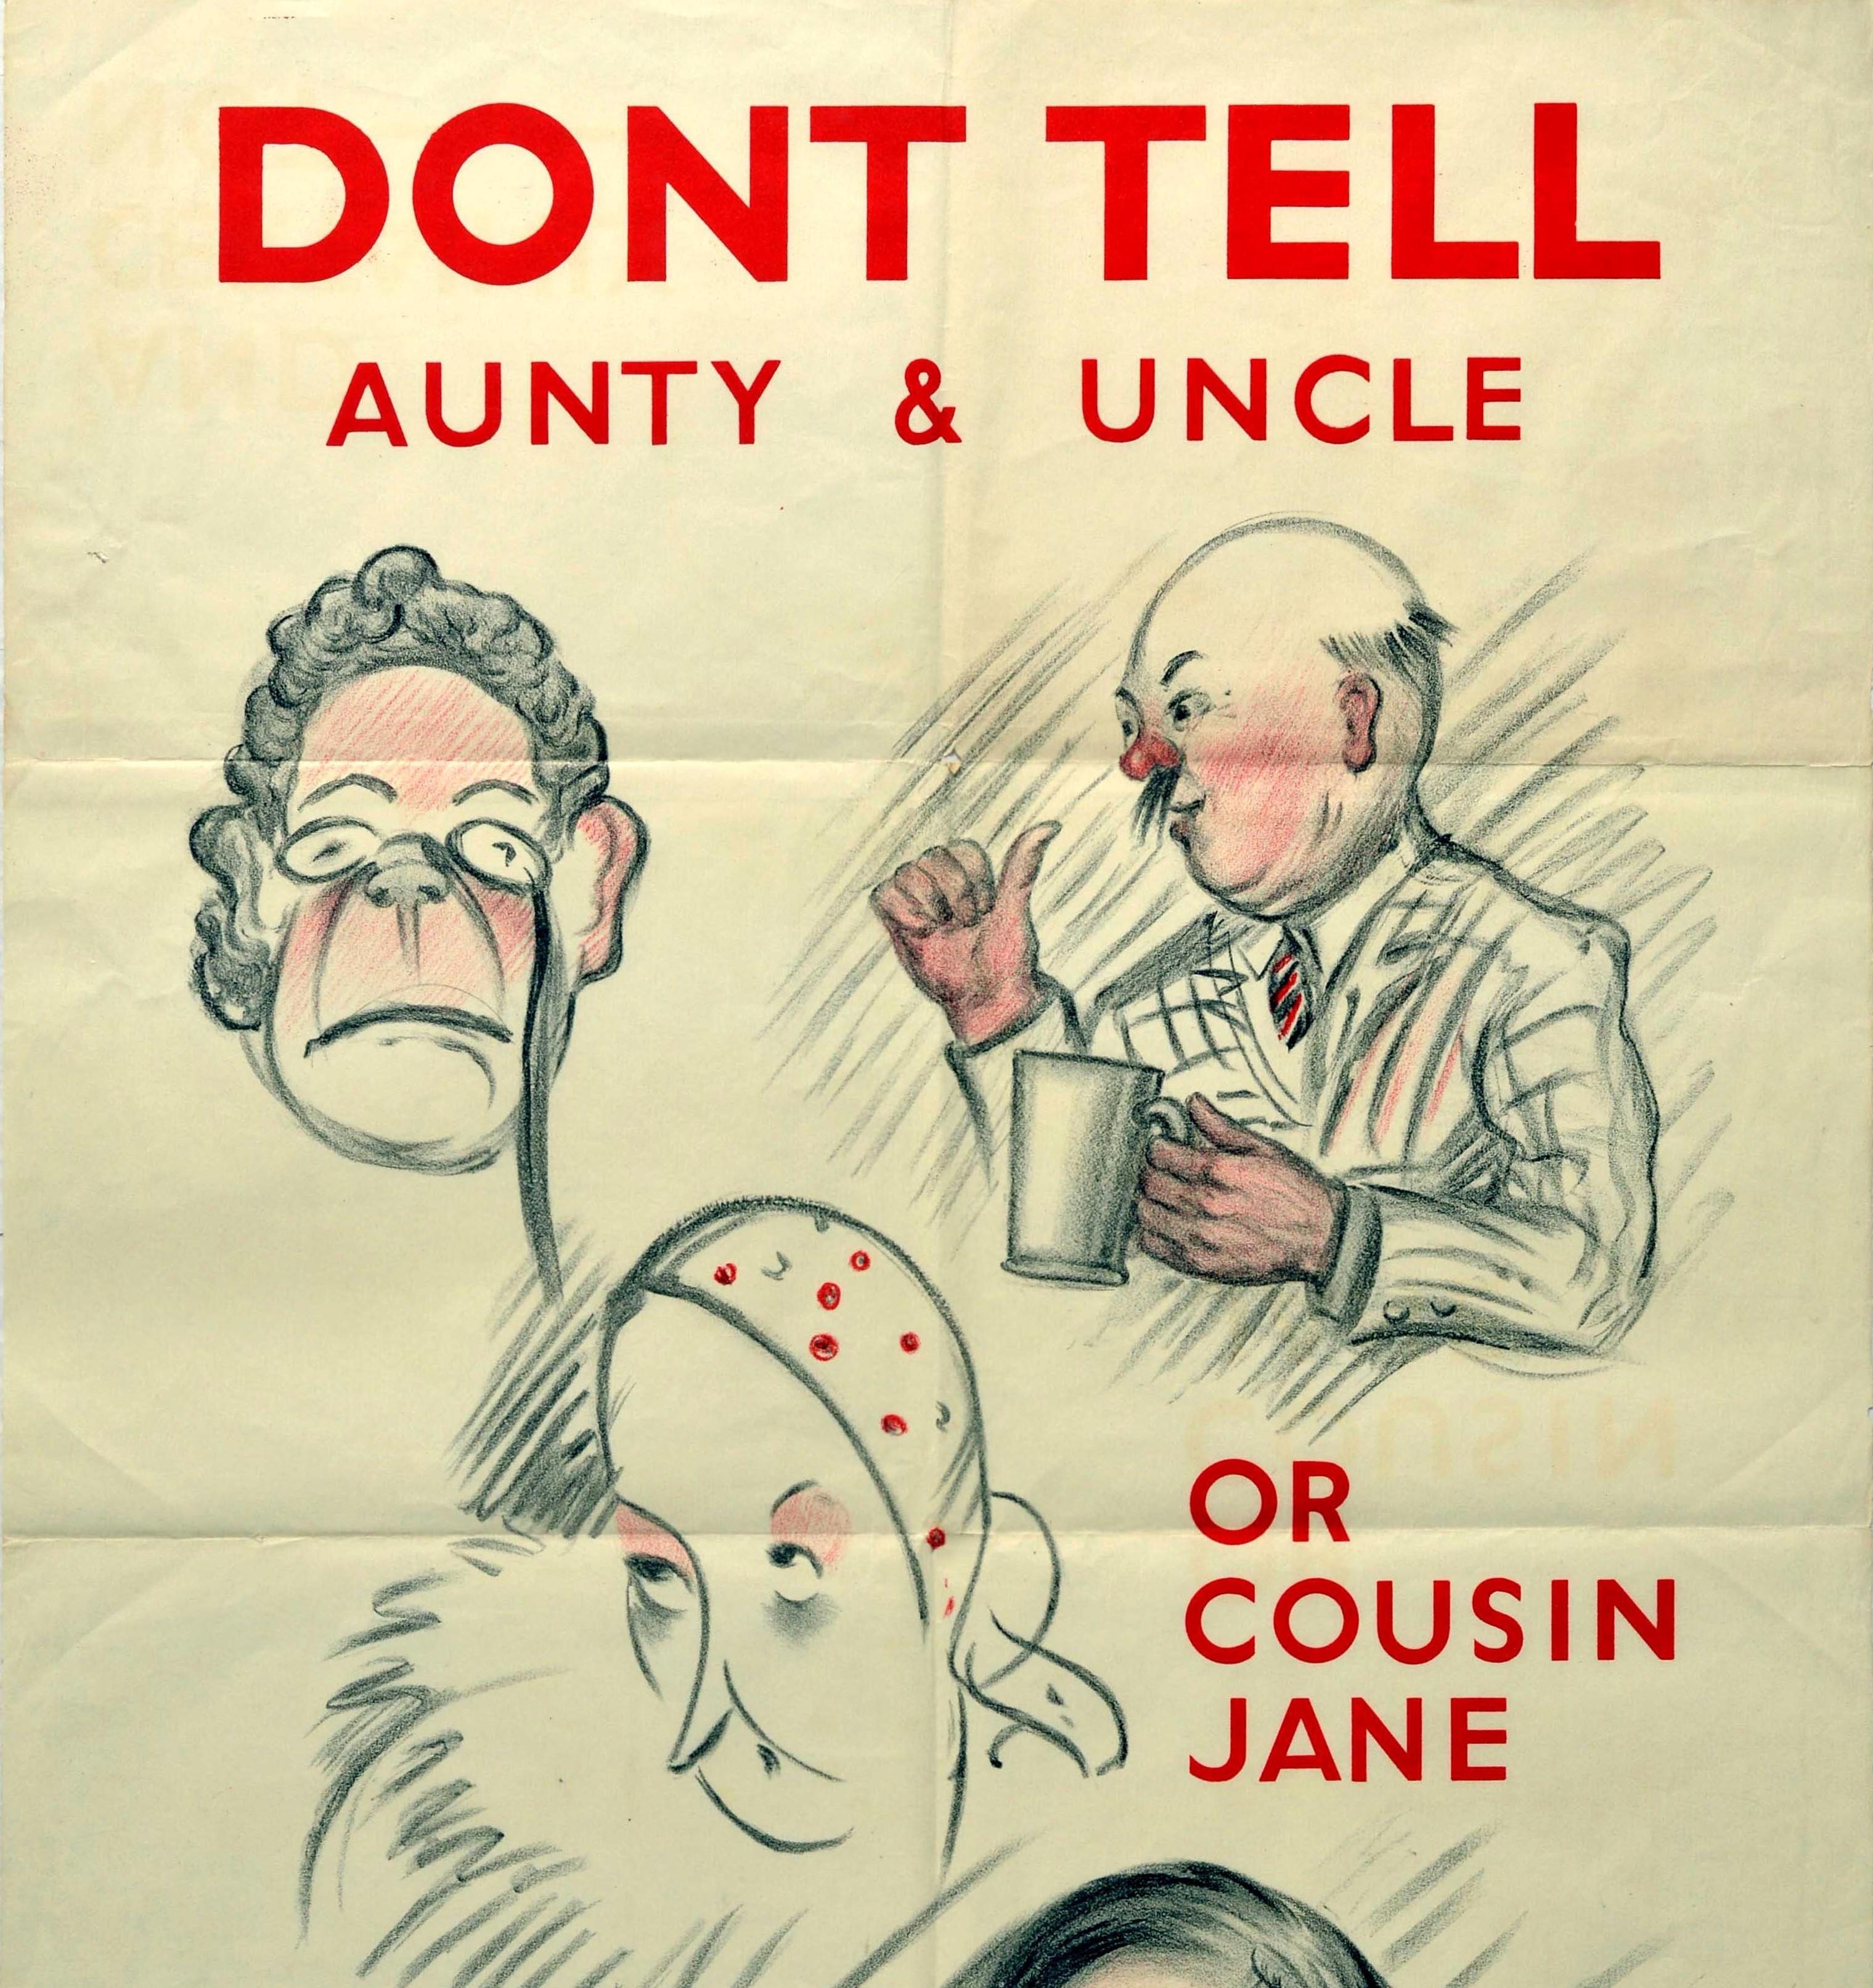 Original Vintage Poster Don't Talk WWII Home Front Propaganda Warning Dont Tell - Print by G. Lacoste